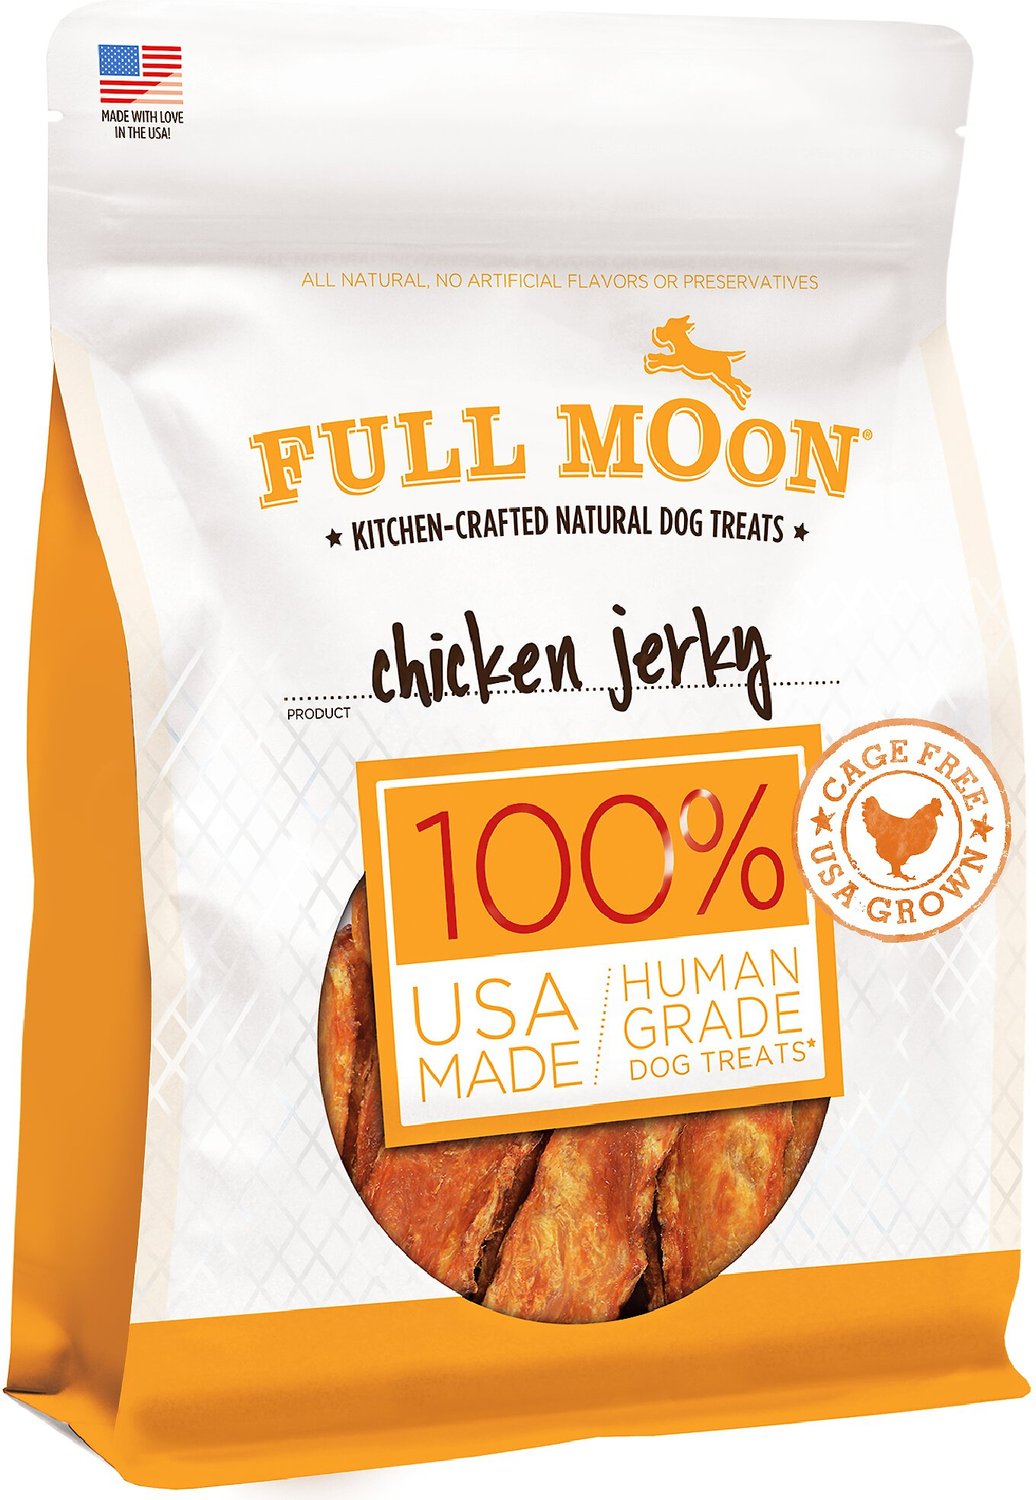 full moon kitchen crafted dog treats